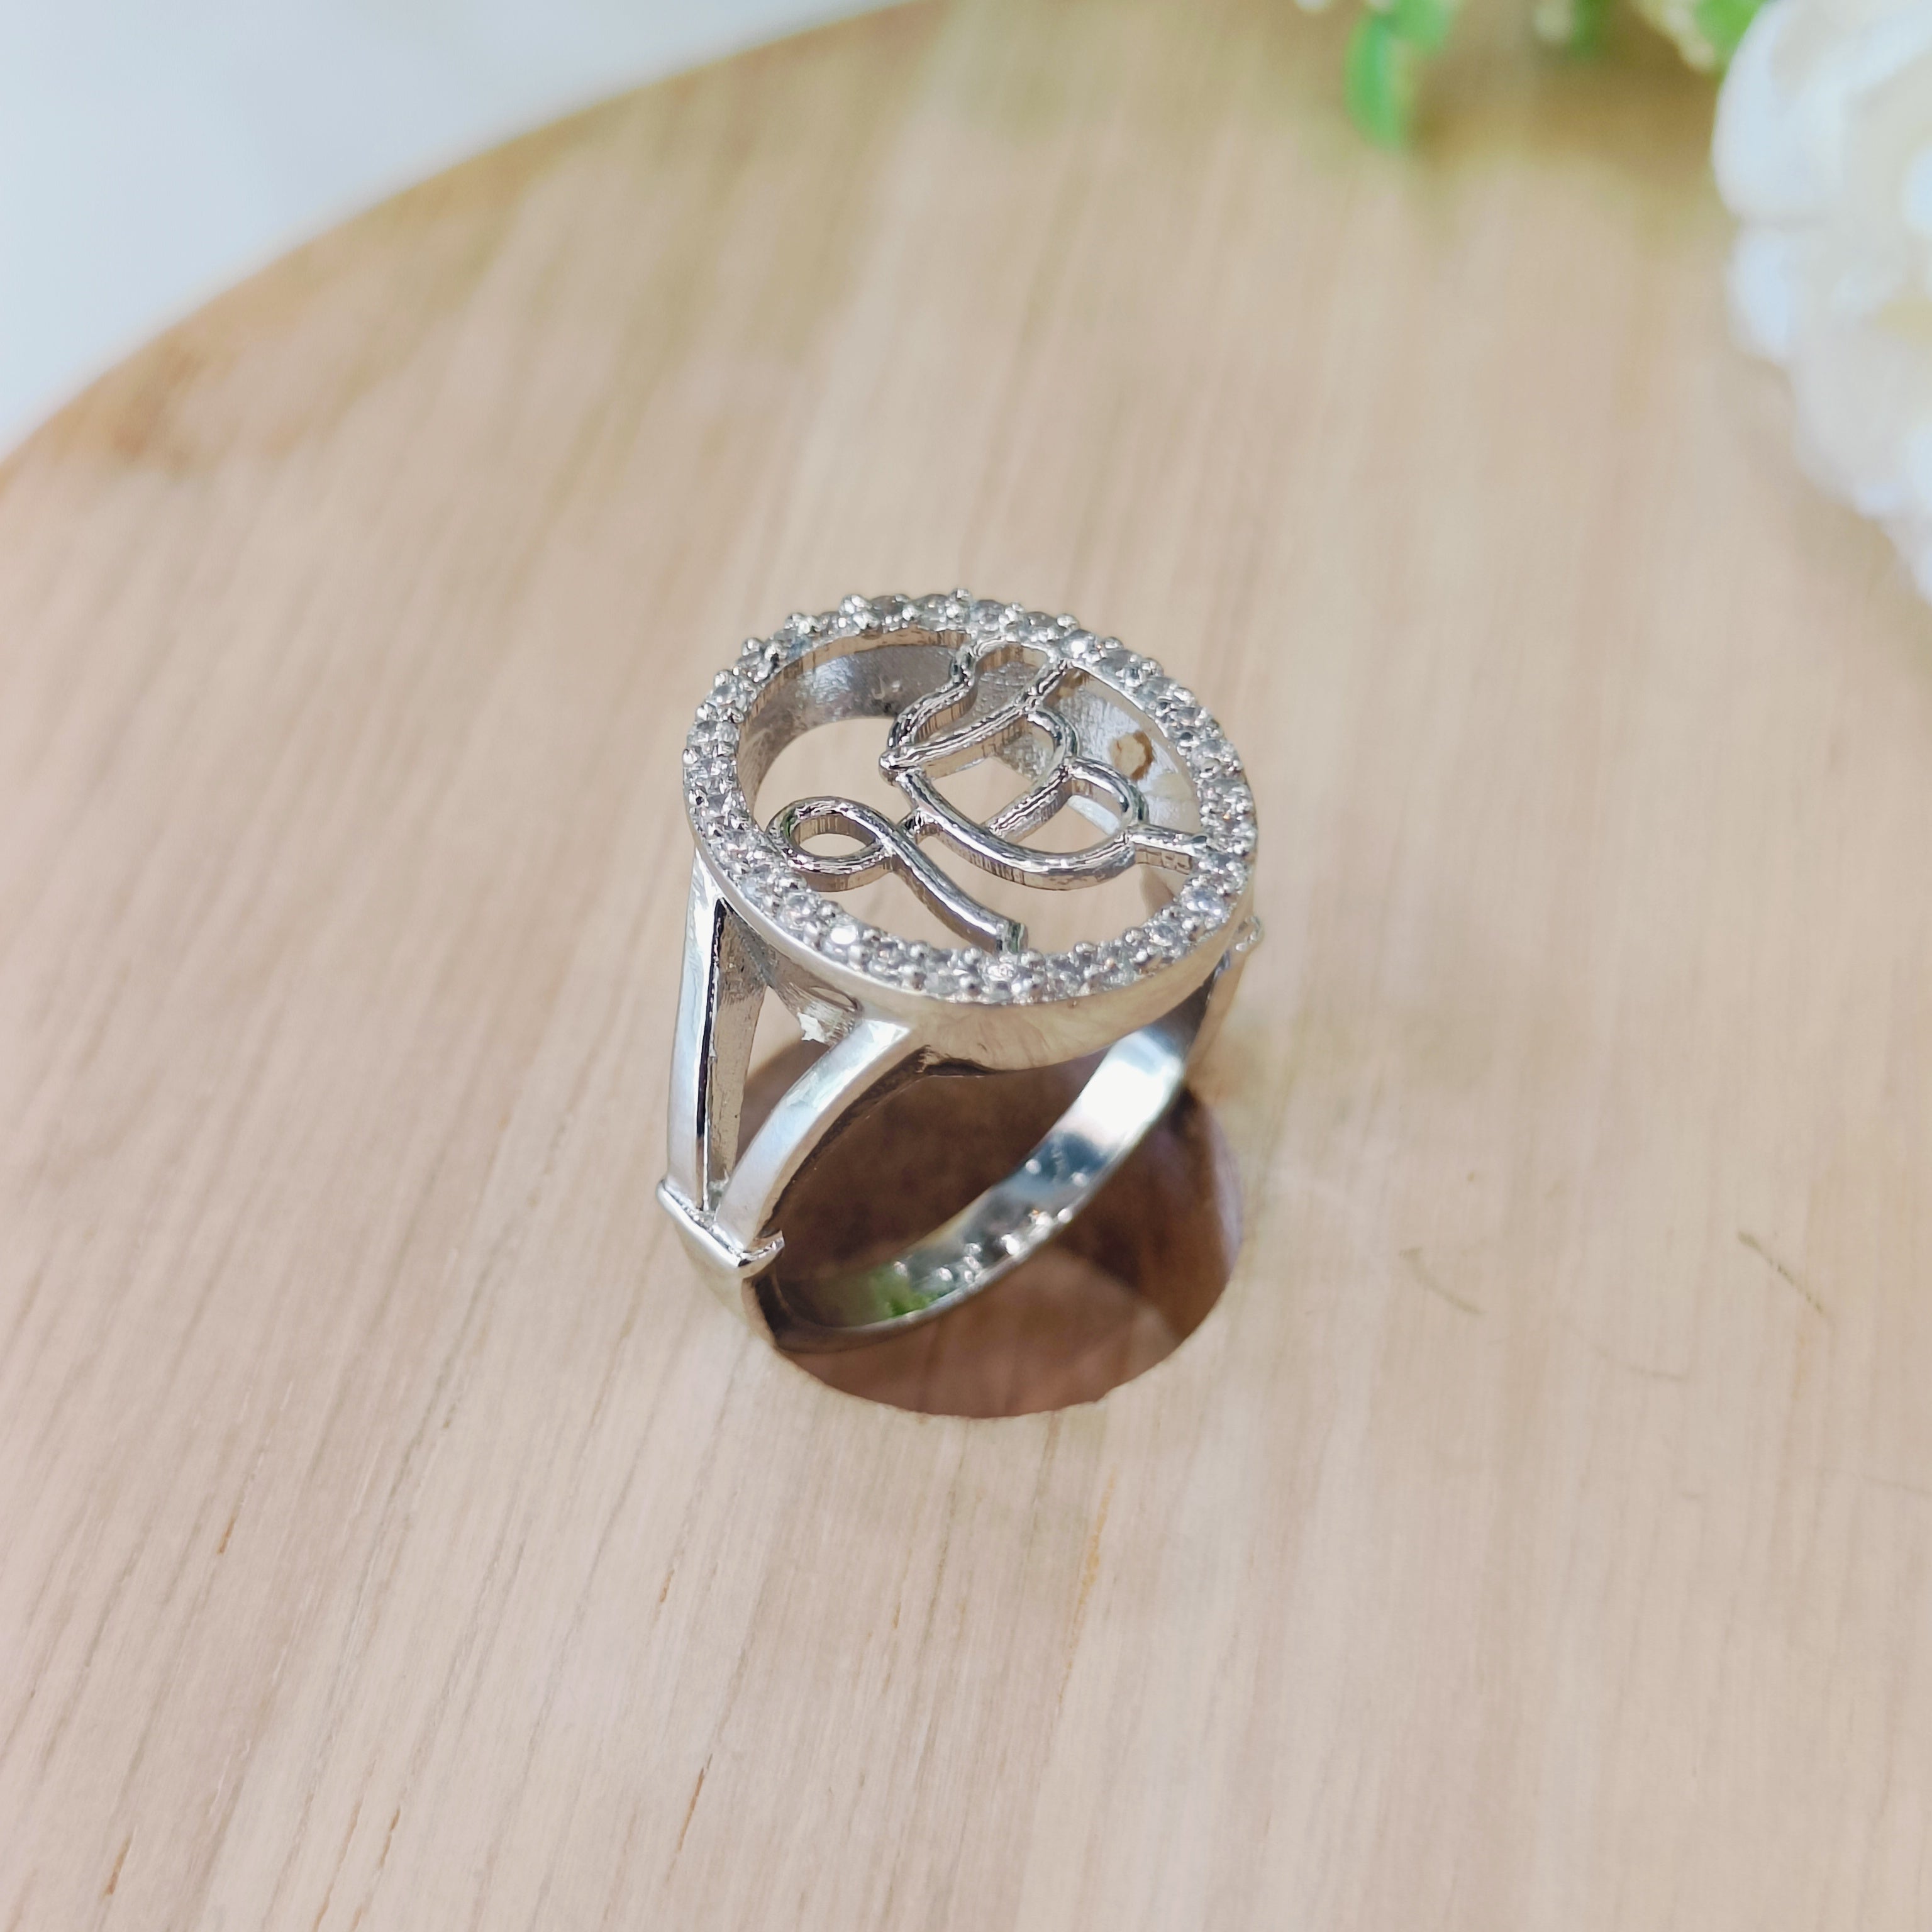 Vs sterling silver cocktail ring 175